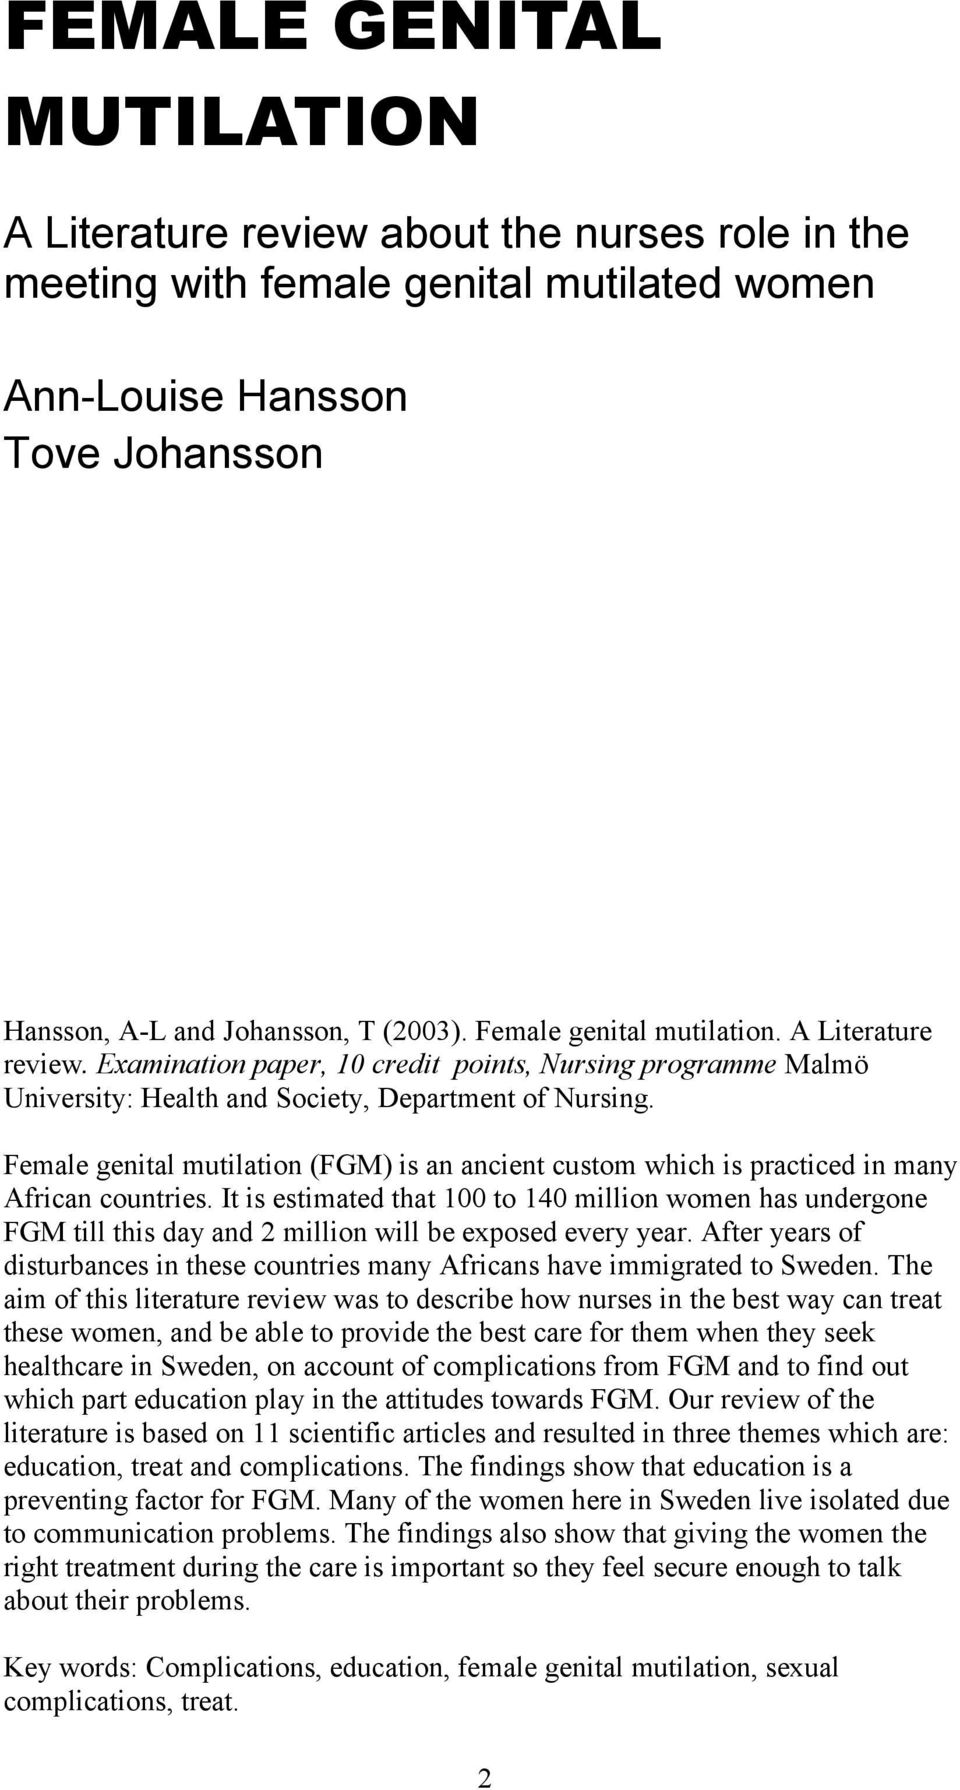 Female genital mutilation (FGM) is an ancient custom which is practiced in many African countries.